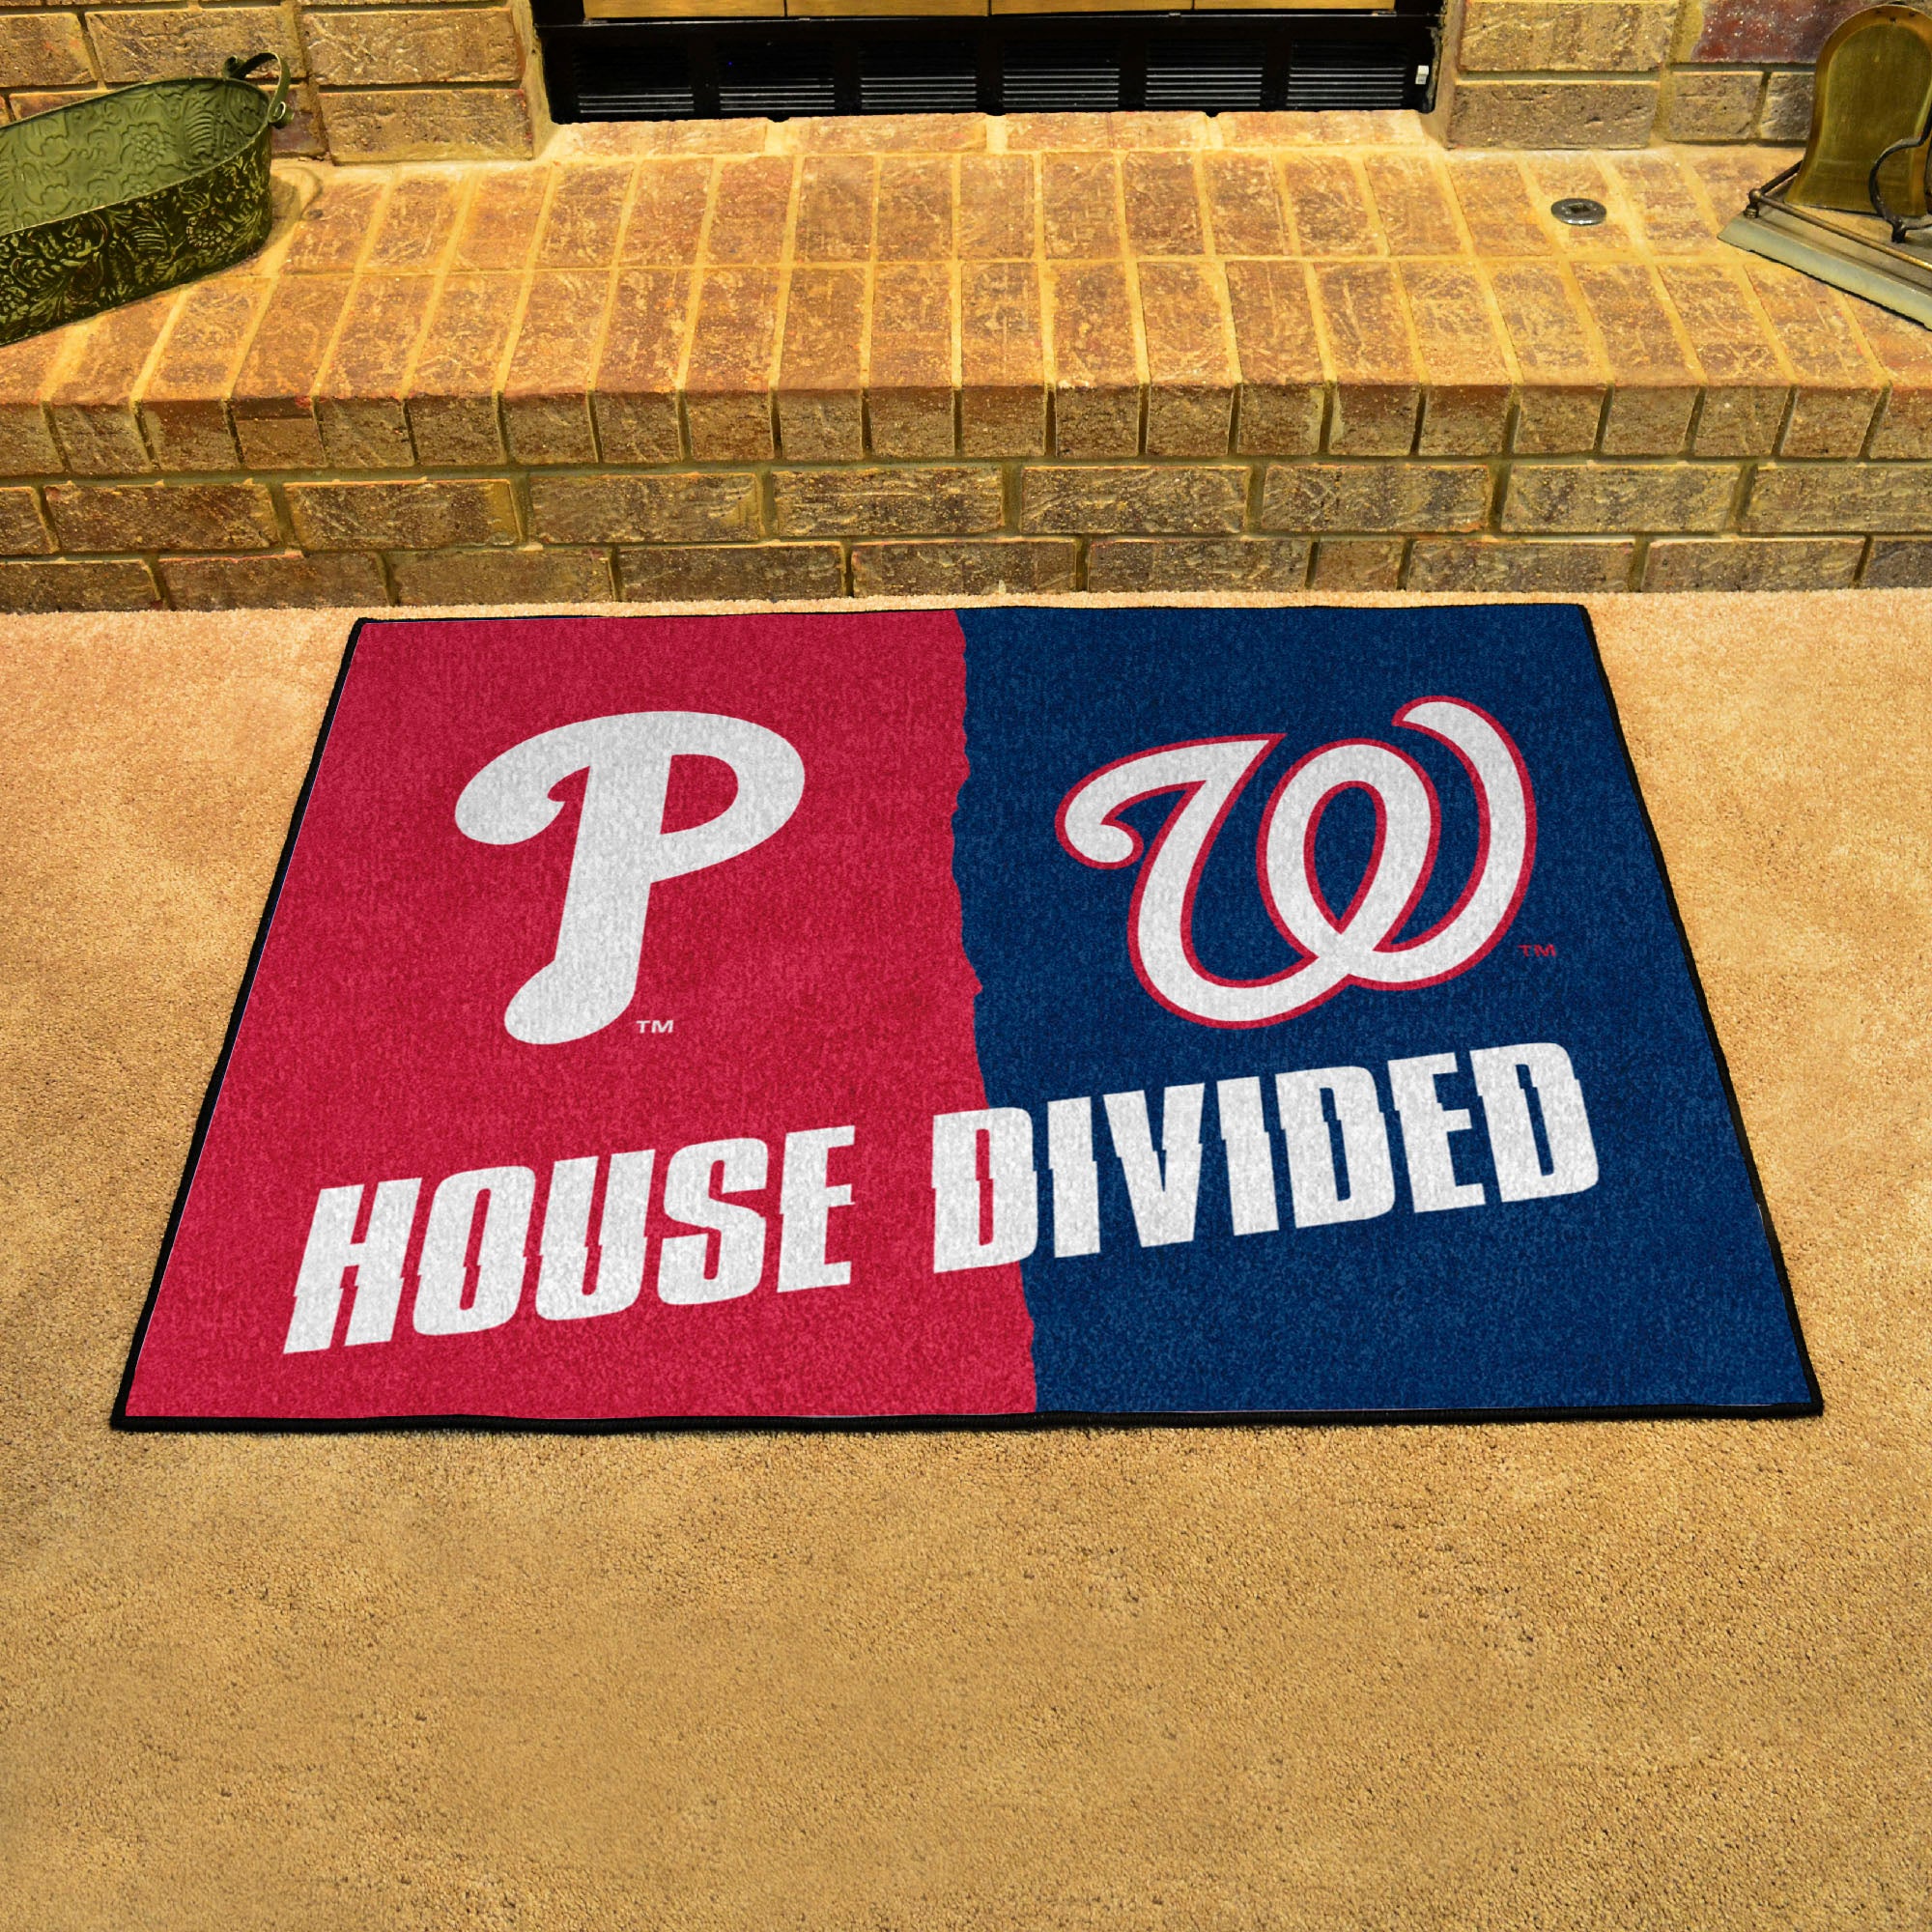 FANMATS, MLB House Divided - Phillies / Nationals House Divided Rug